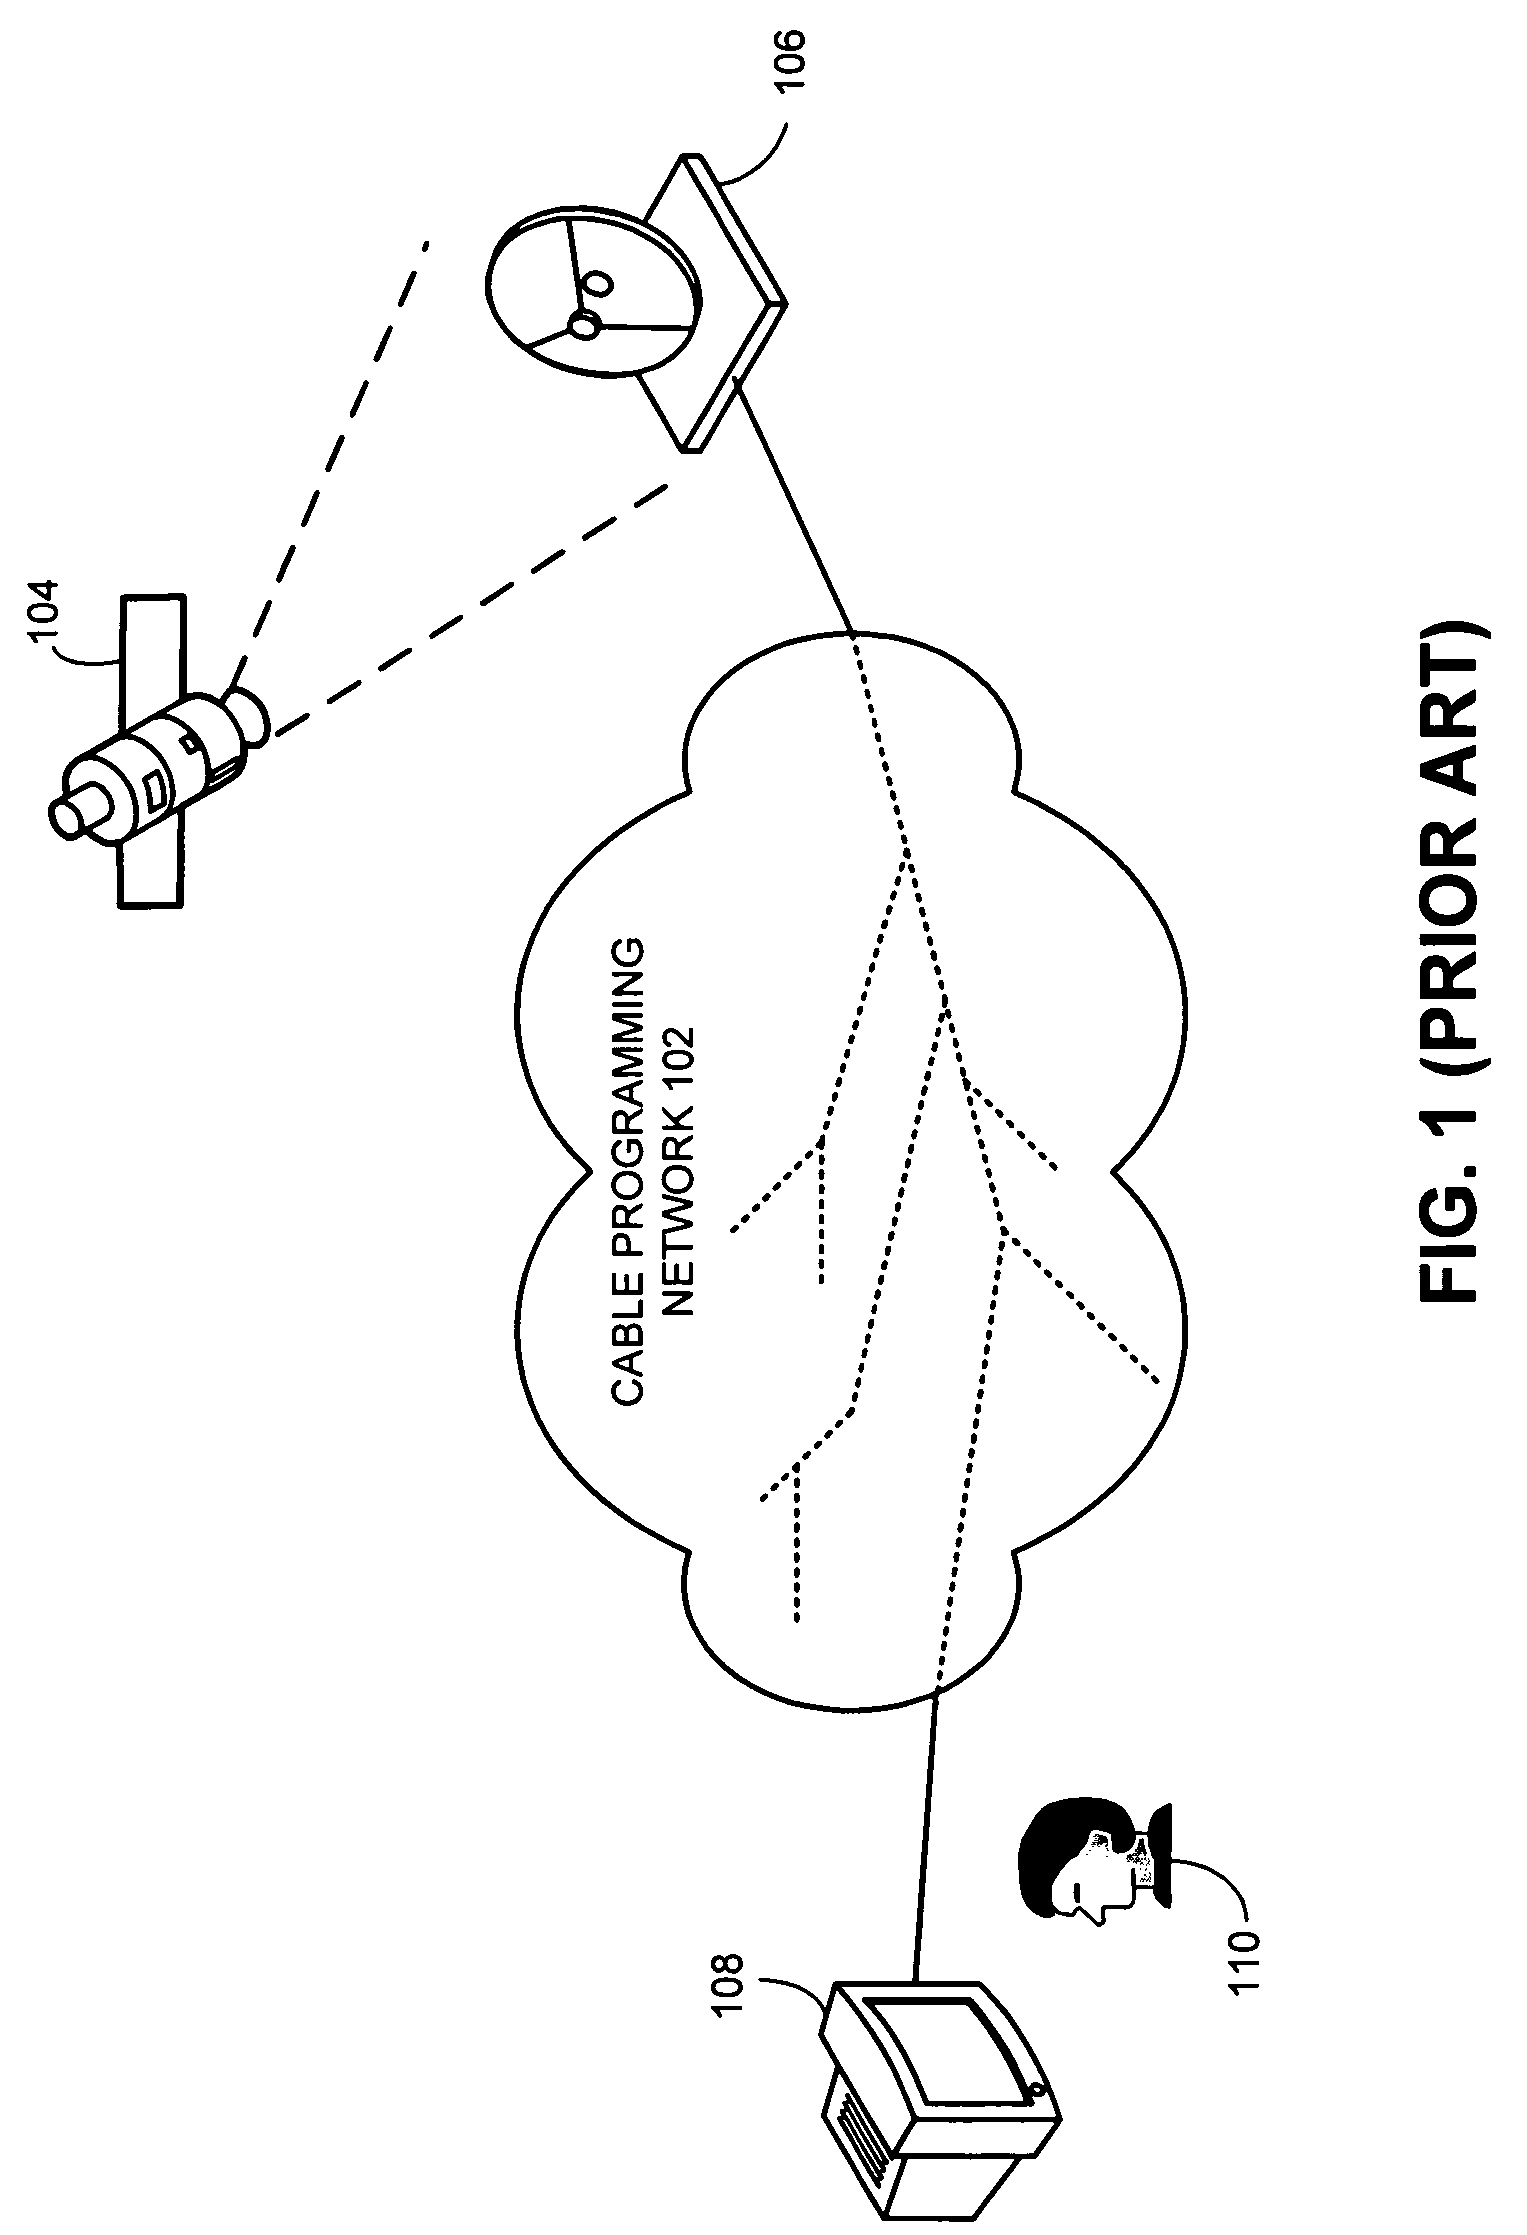 System and method for buffering real-time streaming content in a peer-to-peer overlay network